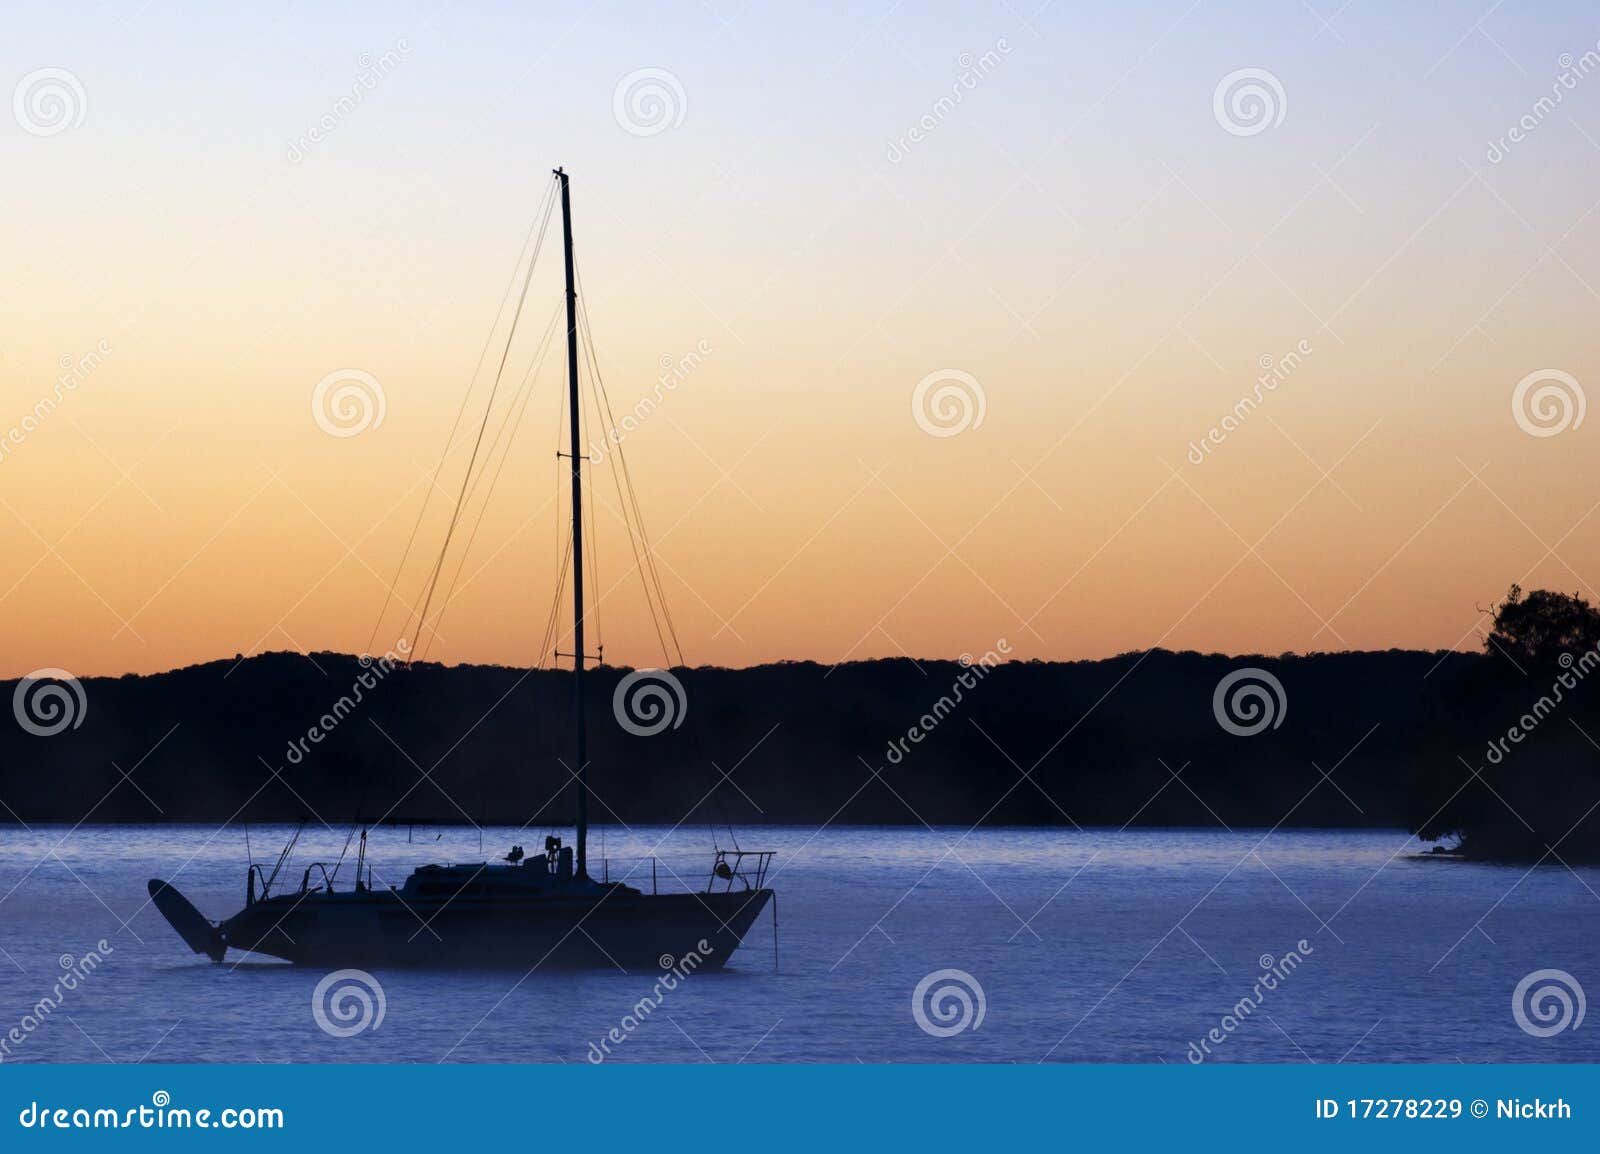 Boat Silhouette Royalty Free Stock Images - Image: 17278229